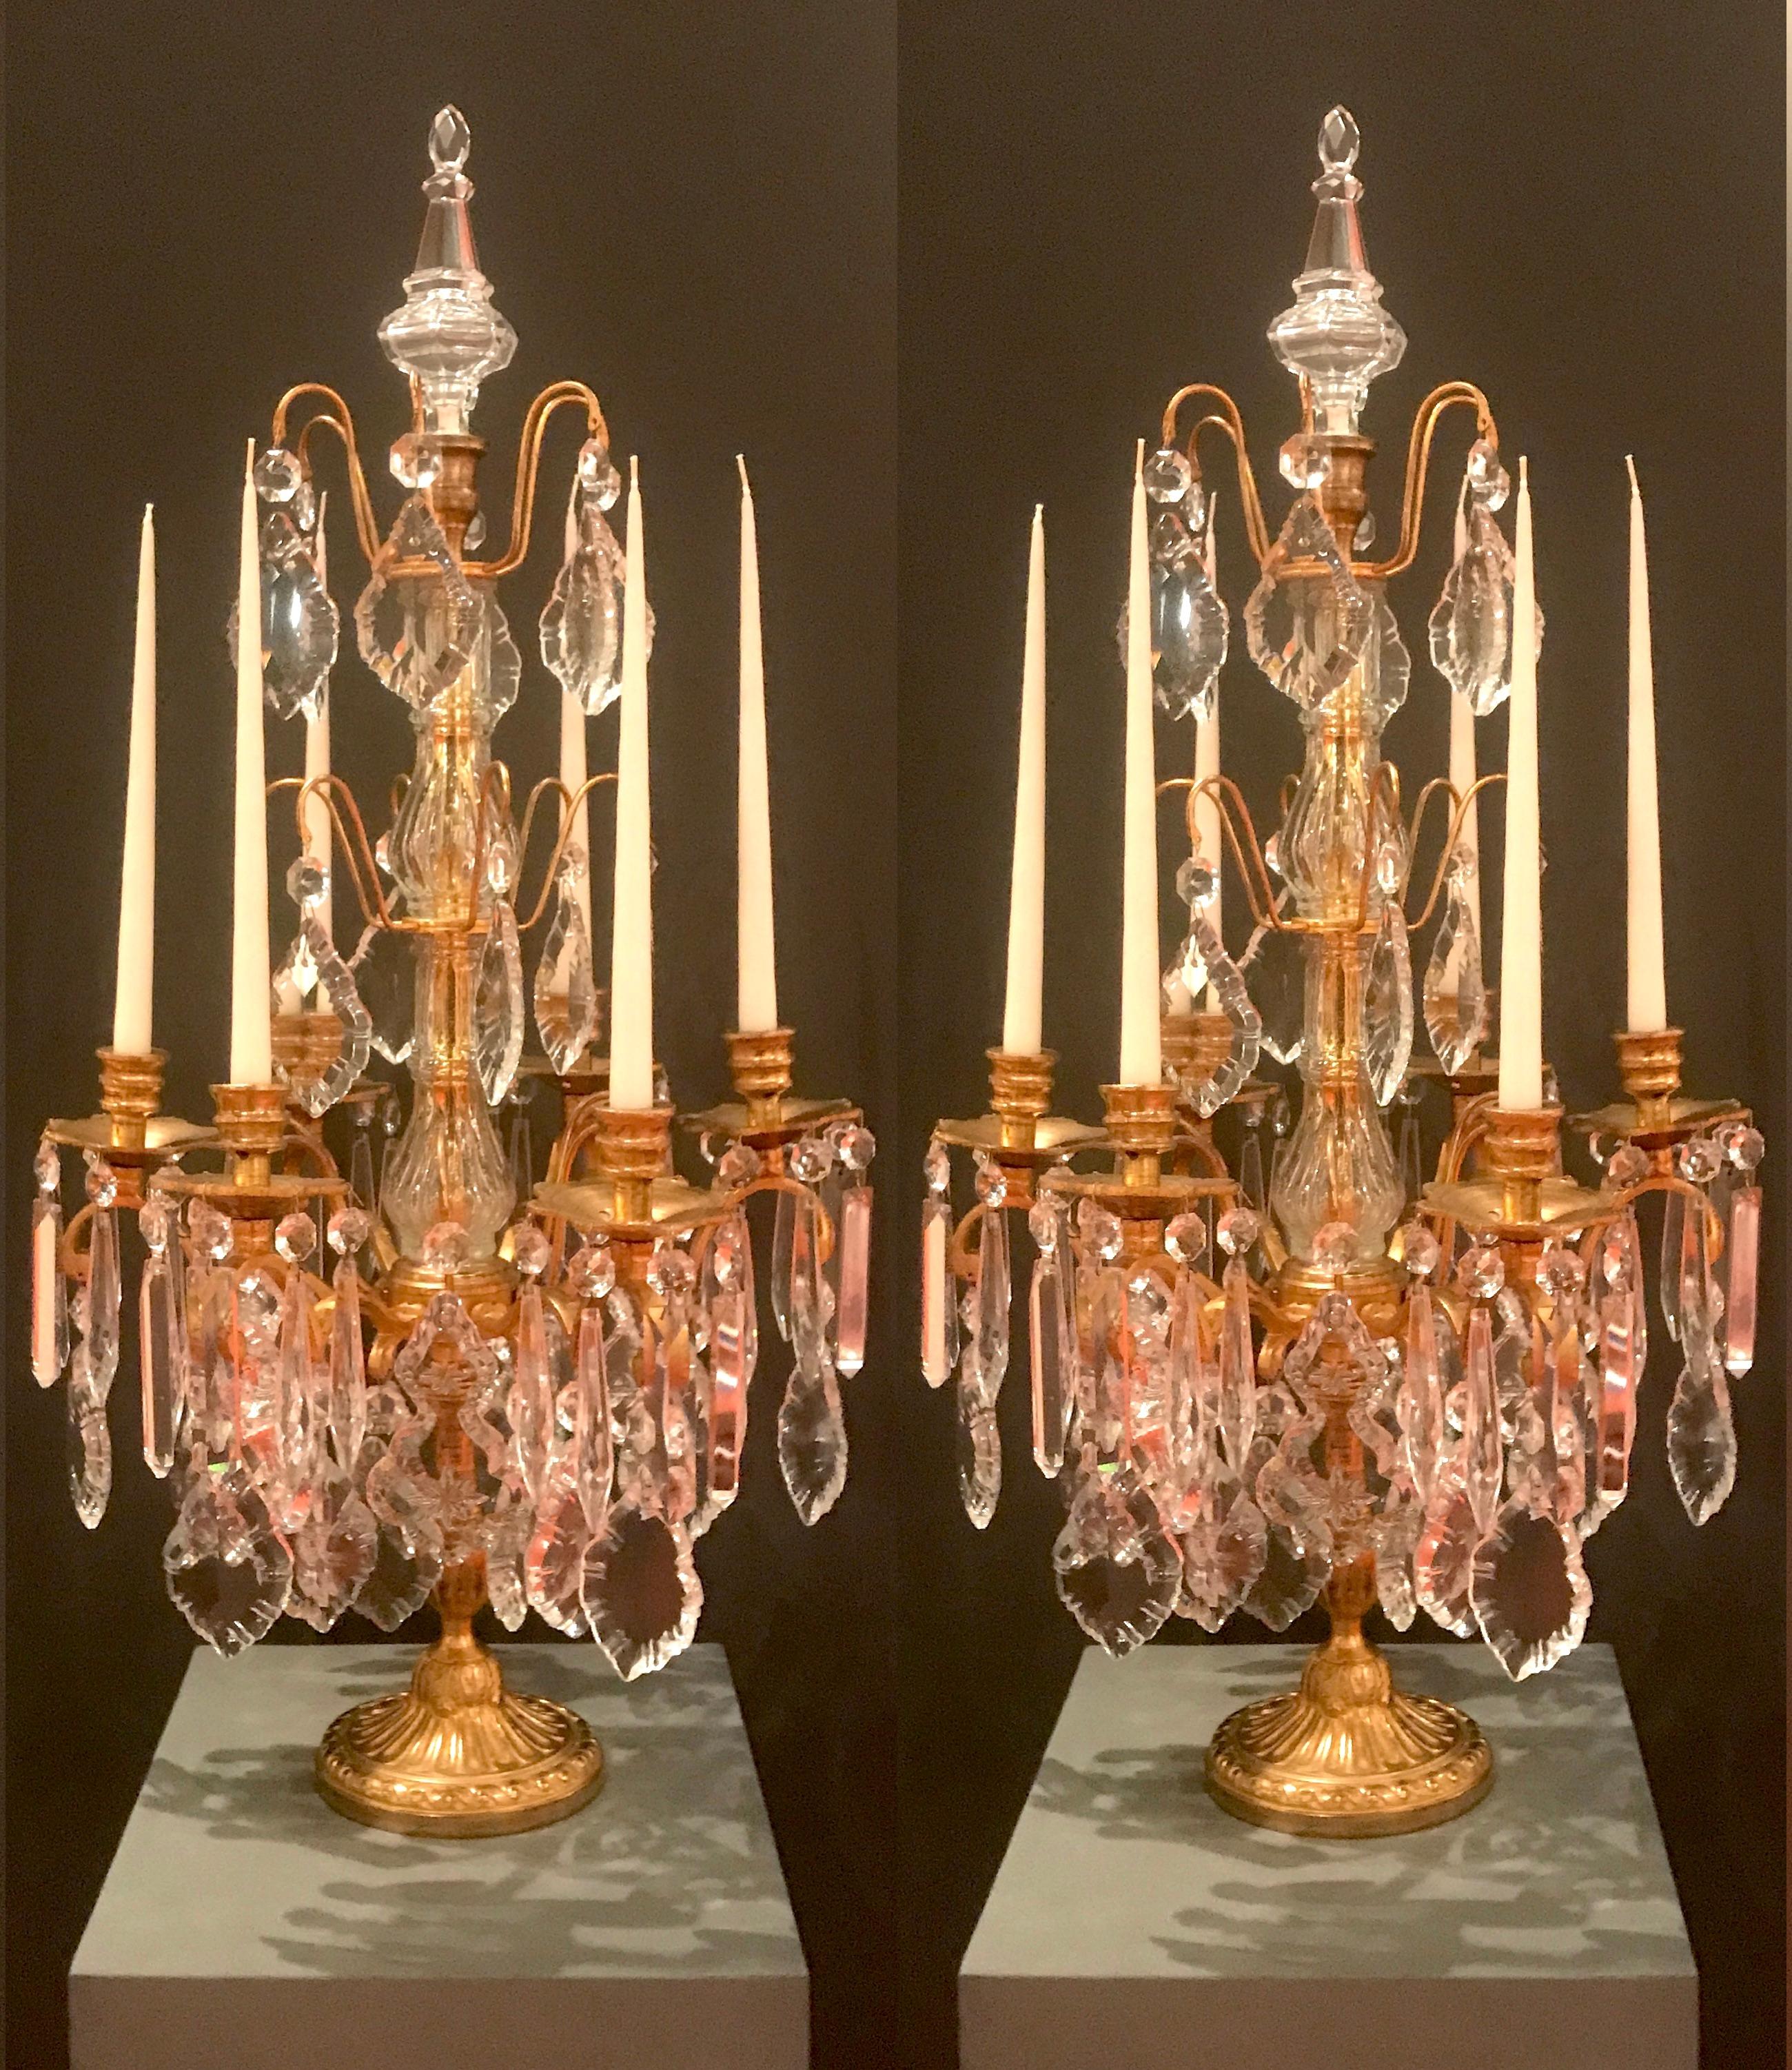 A charming pair of six-armed gilt bronze and crystal candelabra, of French origin, in good condition.
Each ormolu  flambeau has six curved branches, the frame is decorated by fan shaped and prism crystal pendants, as well as the central stem coated